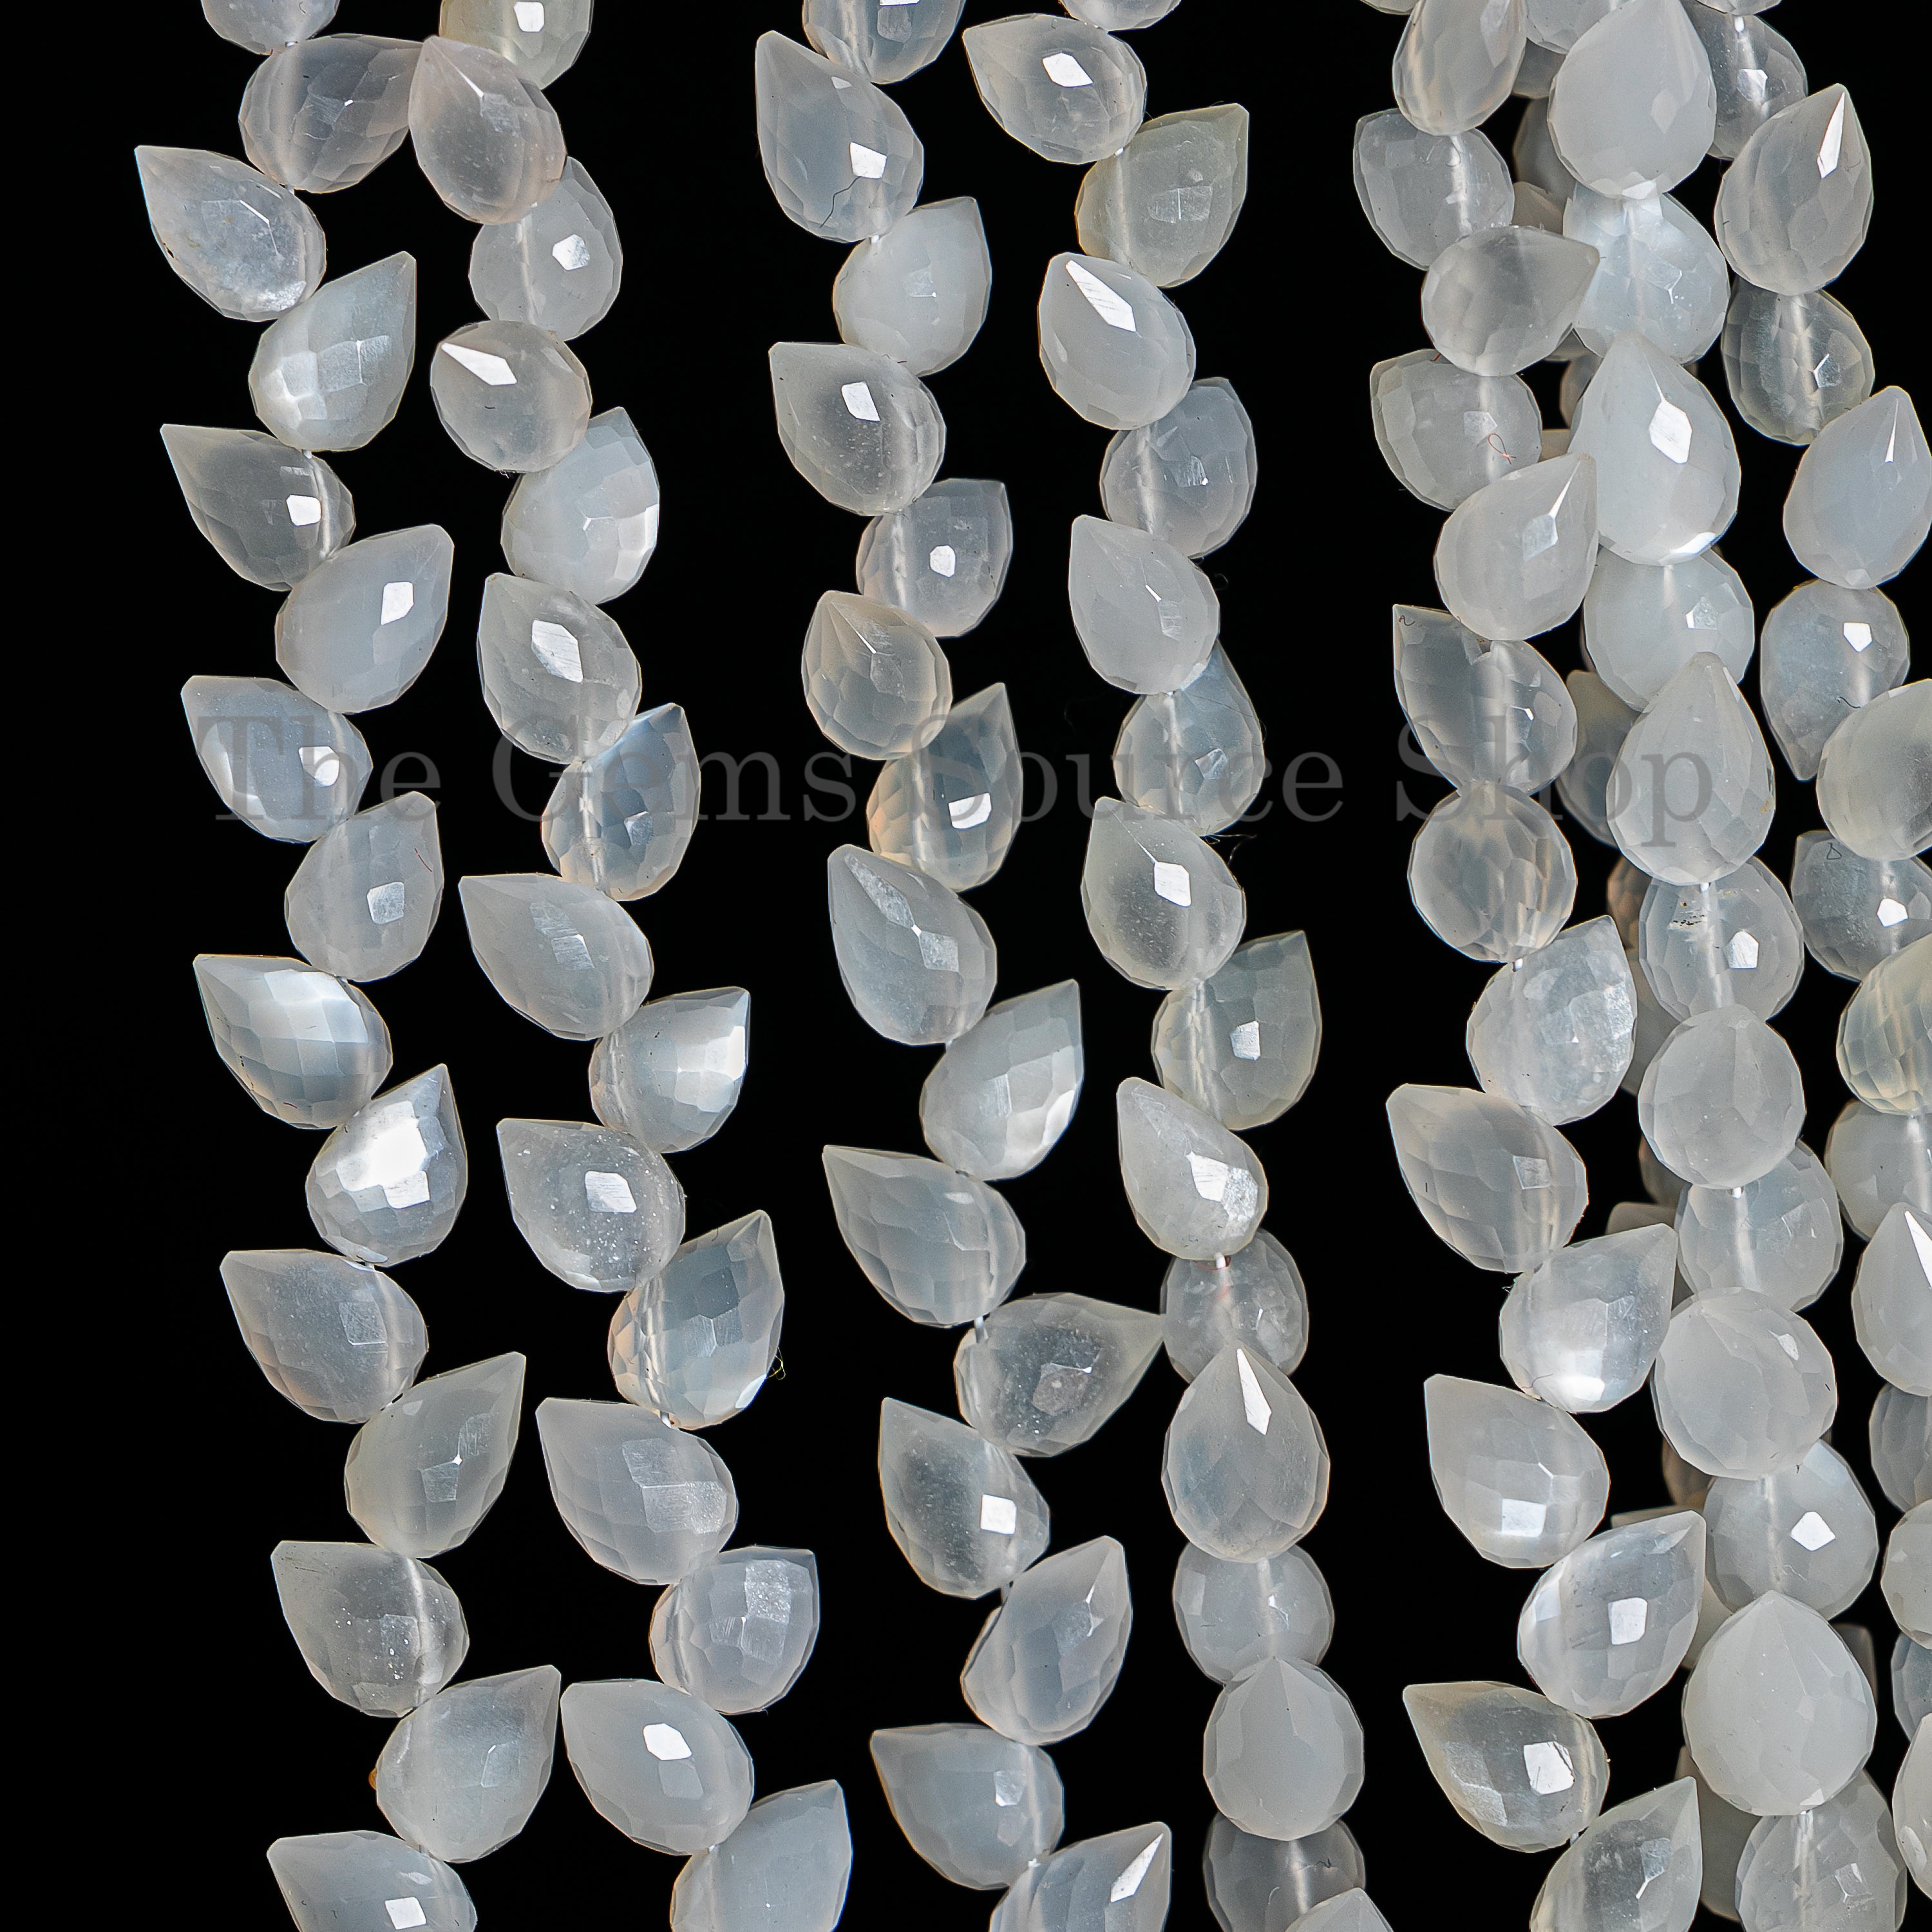 White Moonstone Faceted Drops Shape Beads TGS-4916